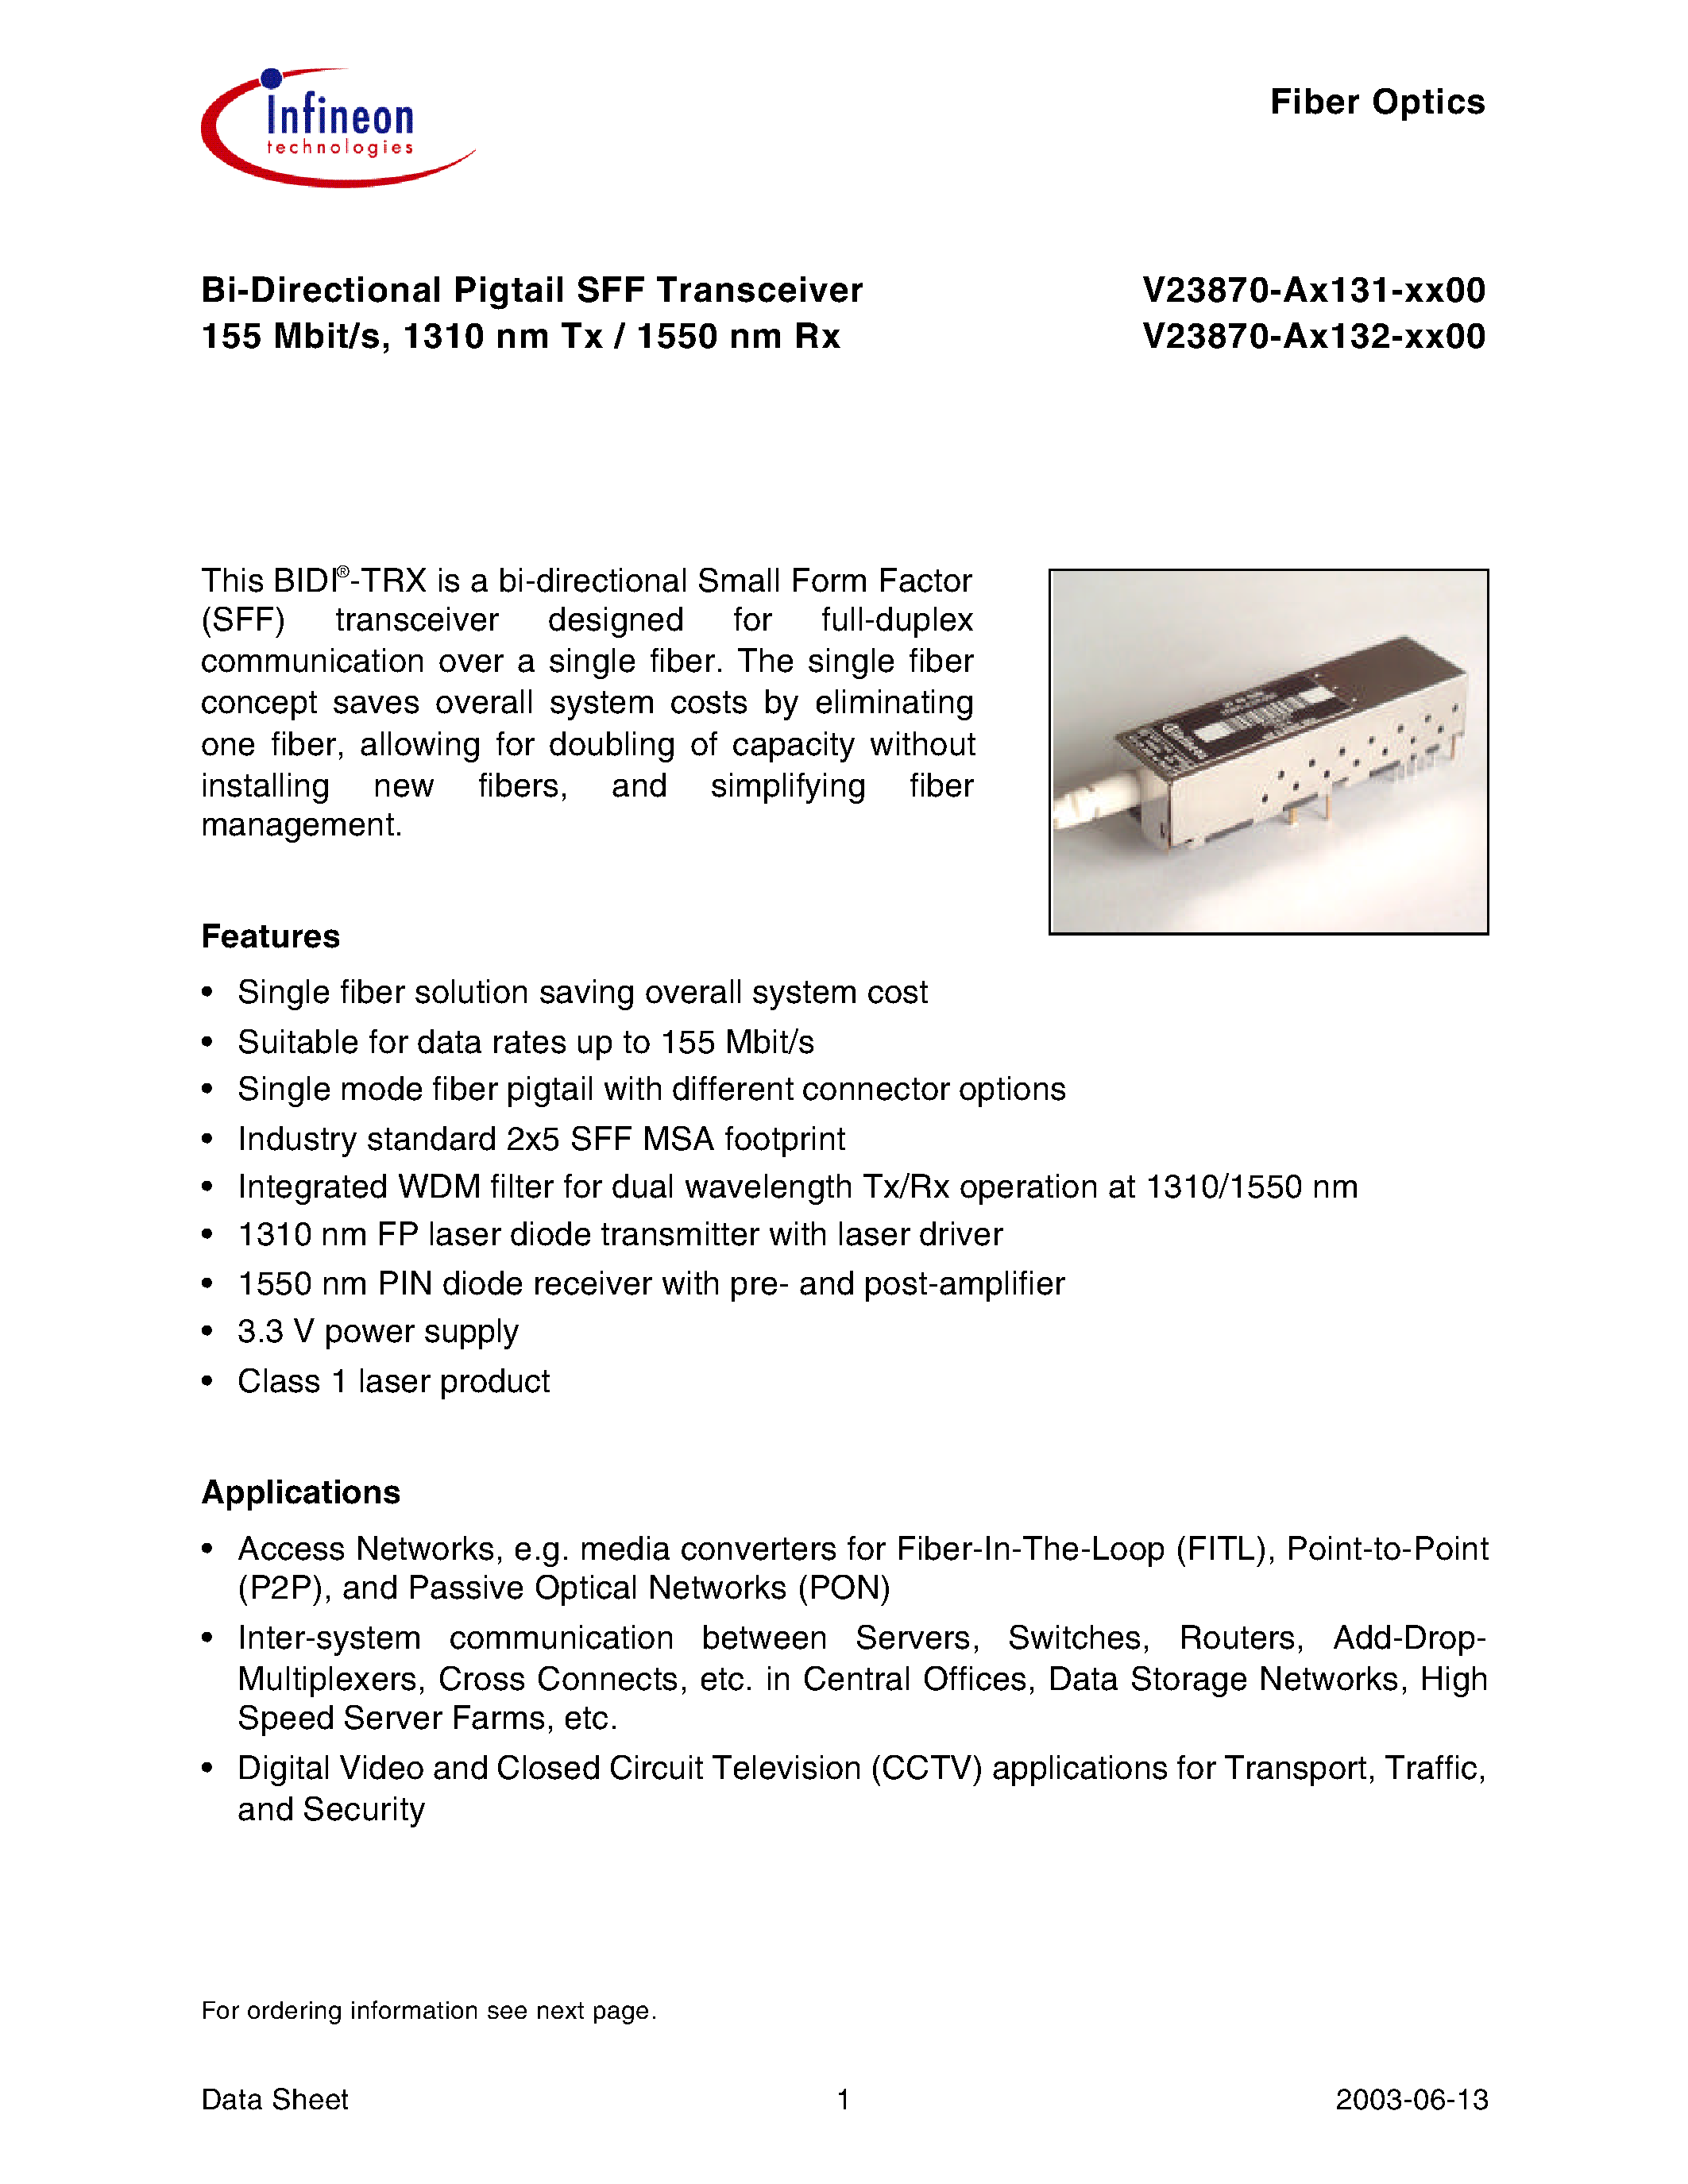 Datasheet V23870-A3132-A200 - Bi-Directional Pigtail SFF Transceiver 155 Mbit/s/ 1310 nm Tx / 1550 nm Rx page 1